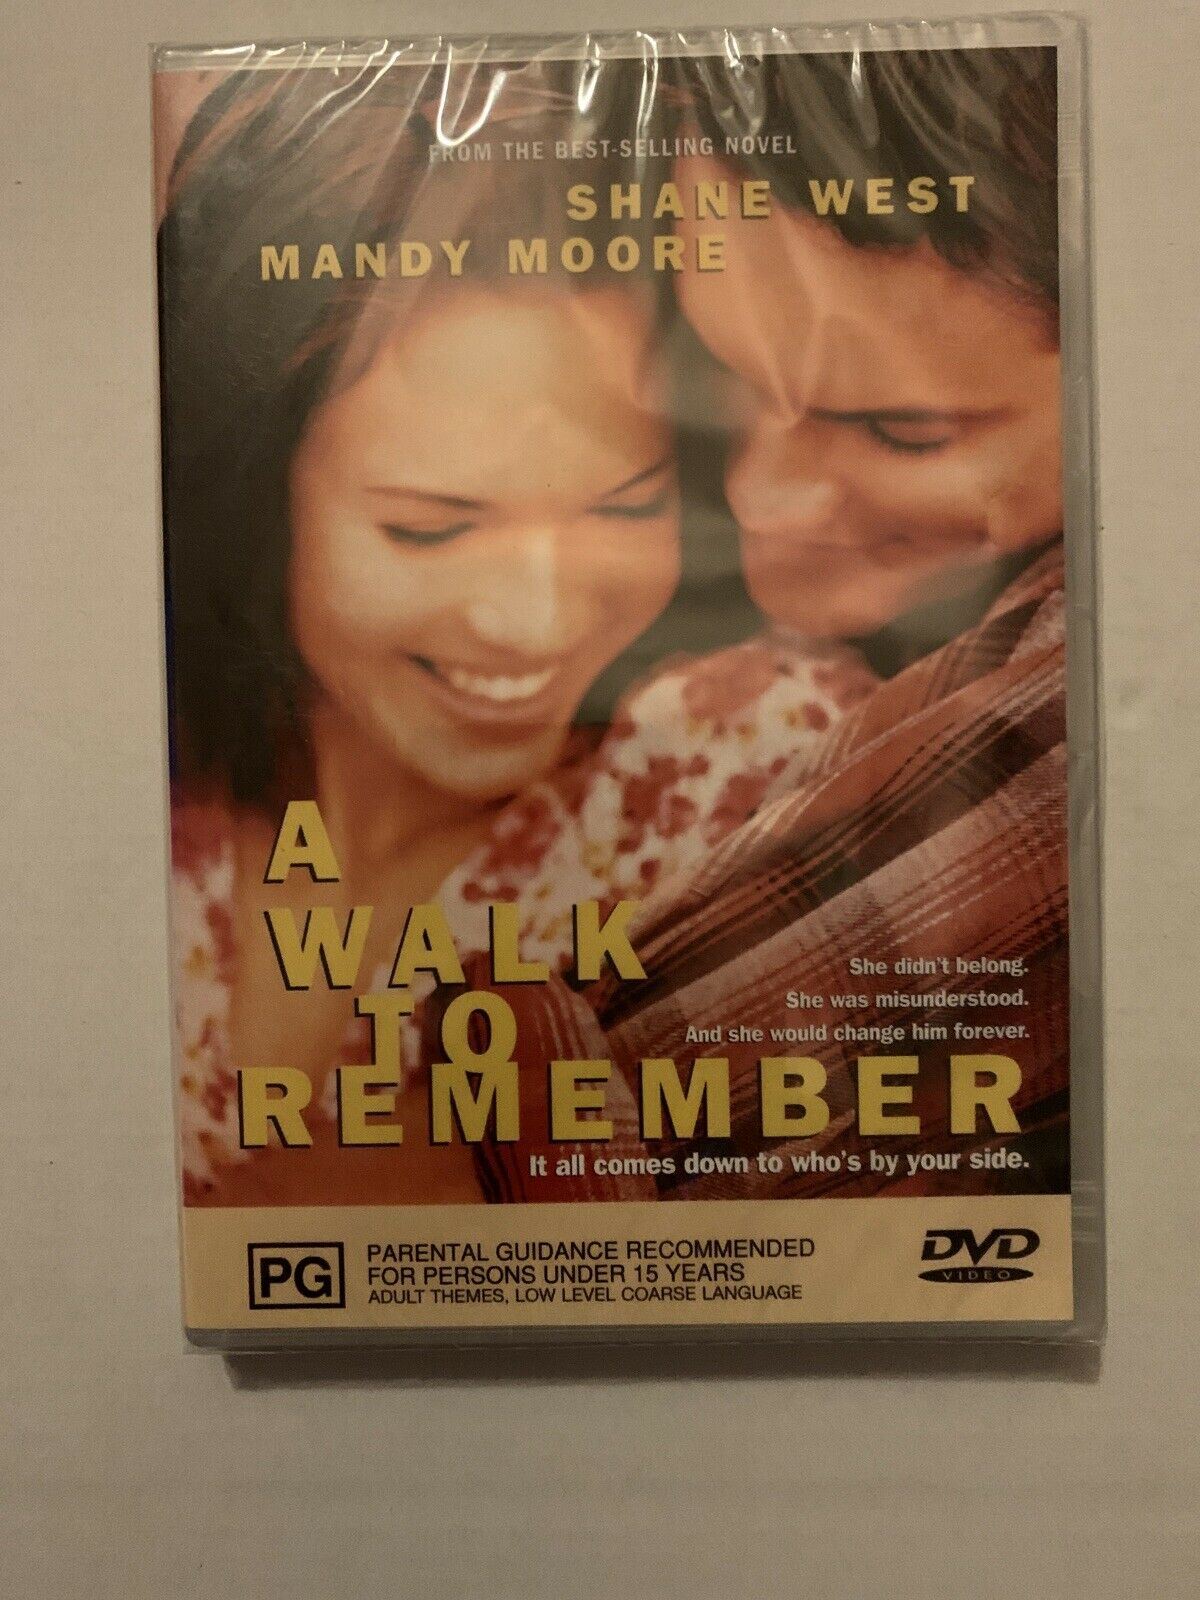 *New Sealed* A Walk To Remember (DVD, 2001) Mandy Moore, Shane West. Region 4